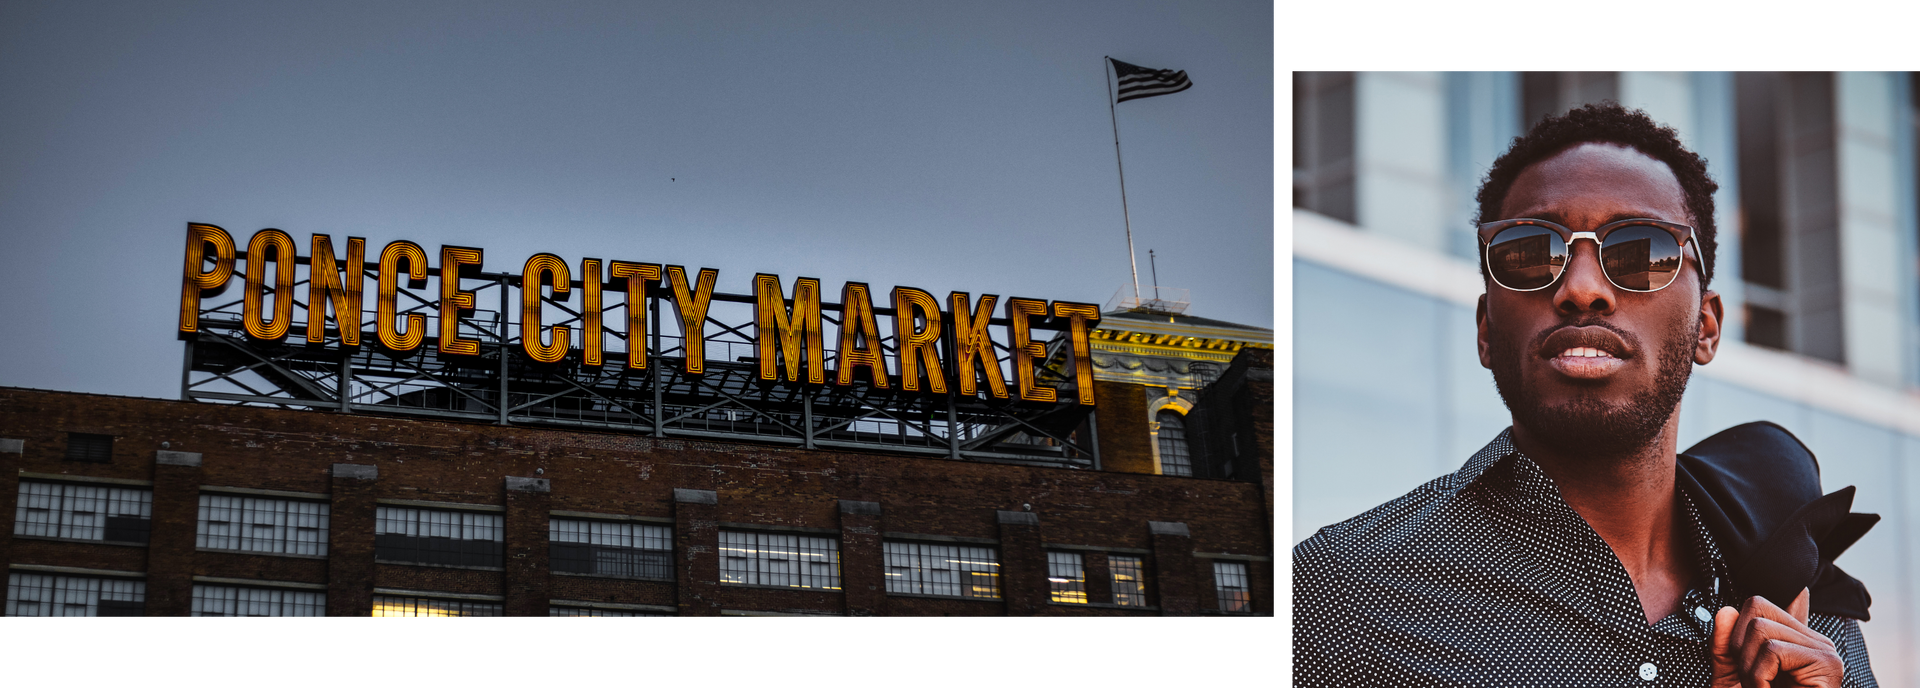 a man is standing in front of a ponce city market sign .